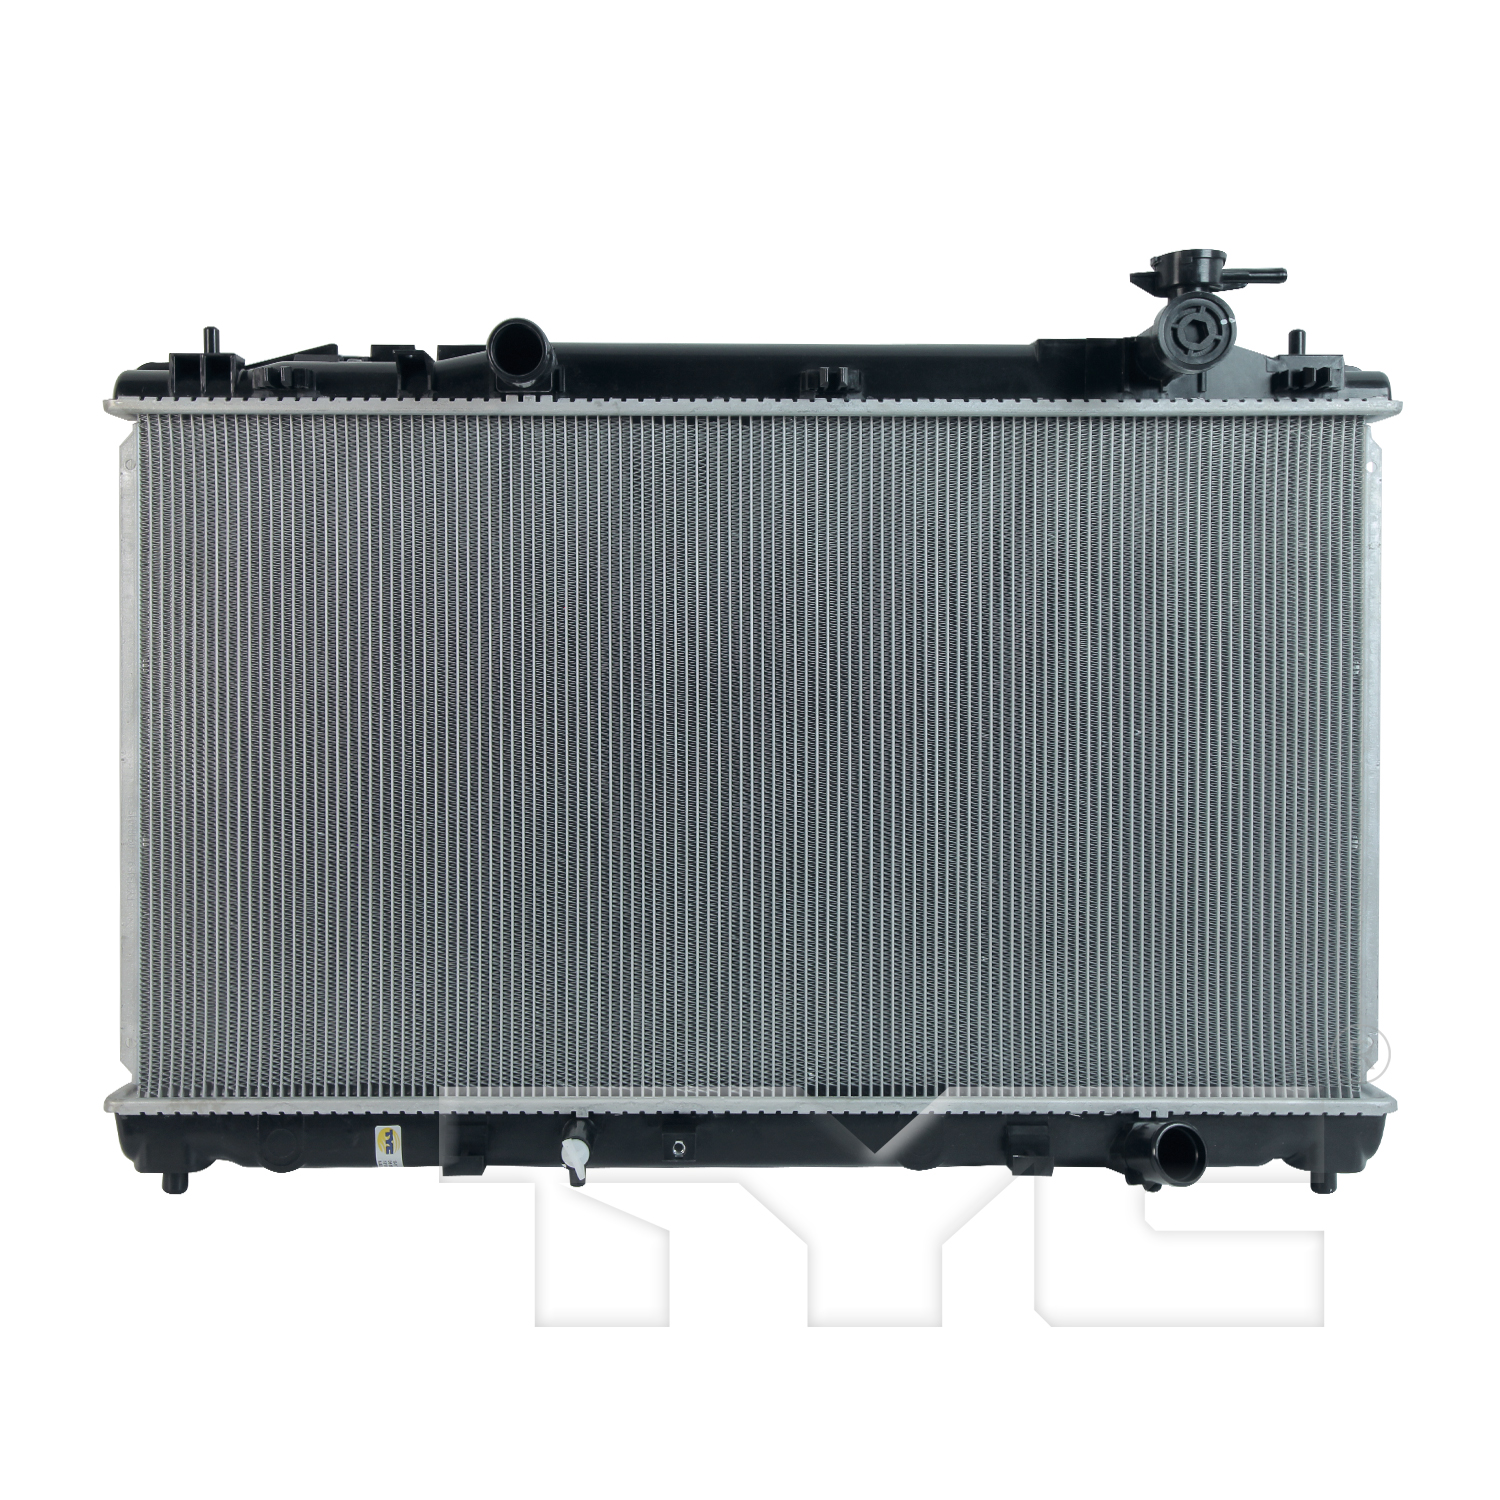 Aftermarket RADIATORS for TOYOTA - CAMRY, CAMRY,10-11,Radiator assembly